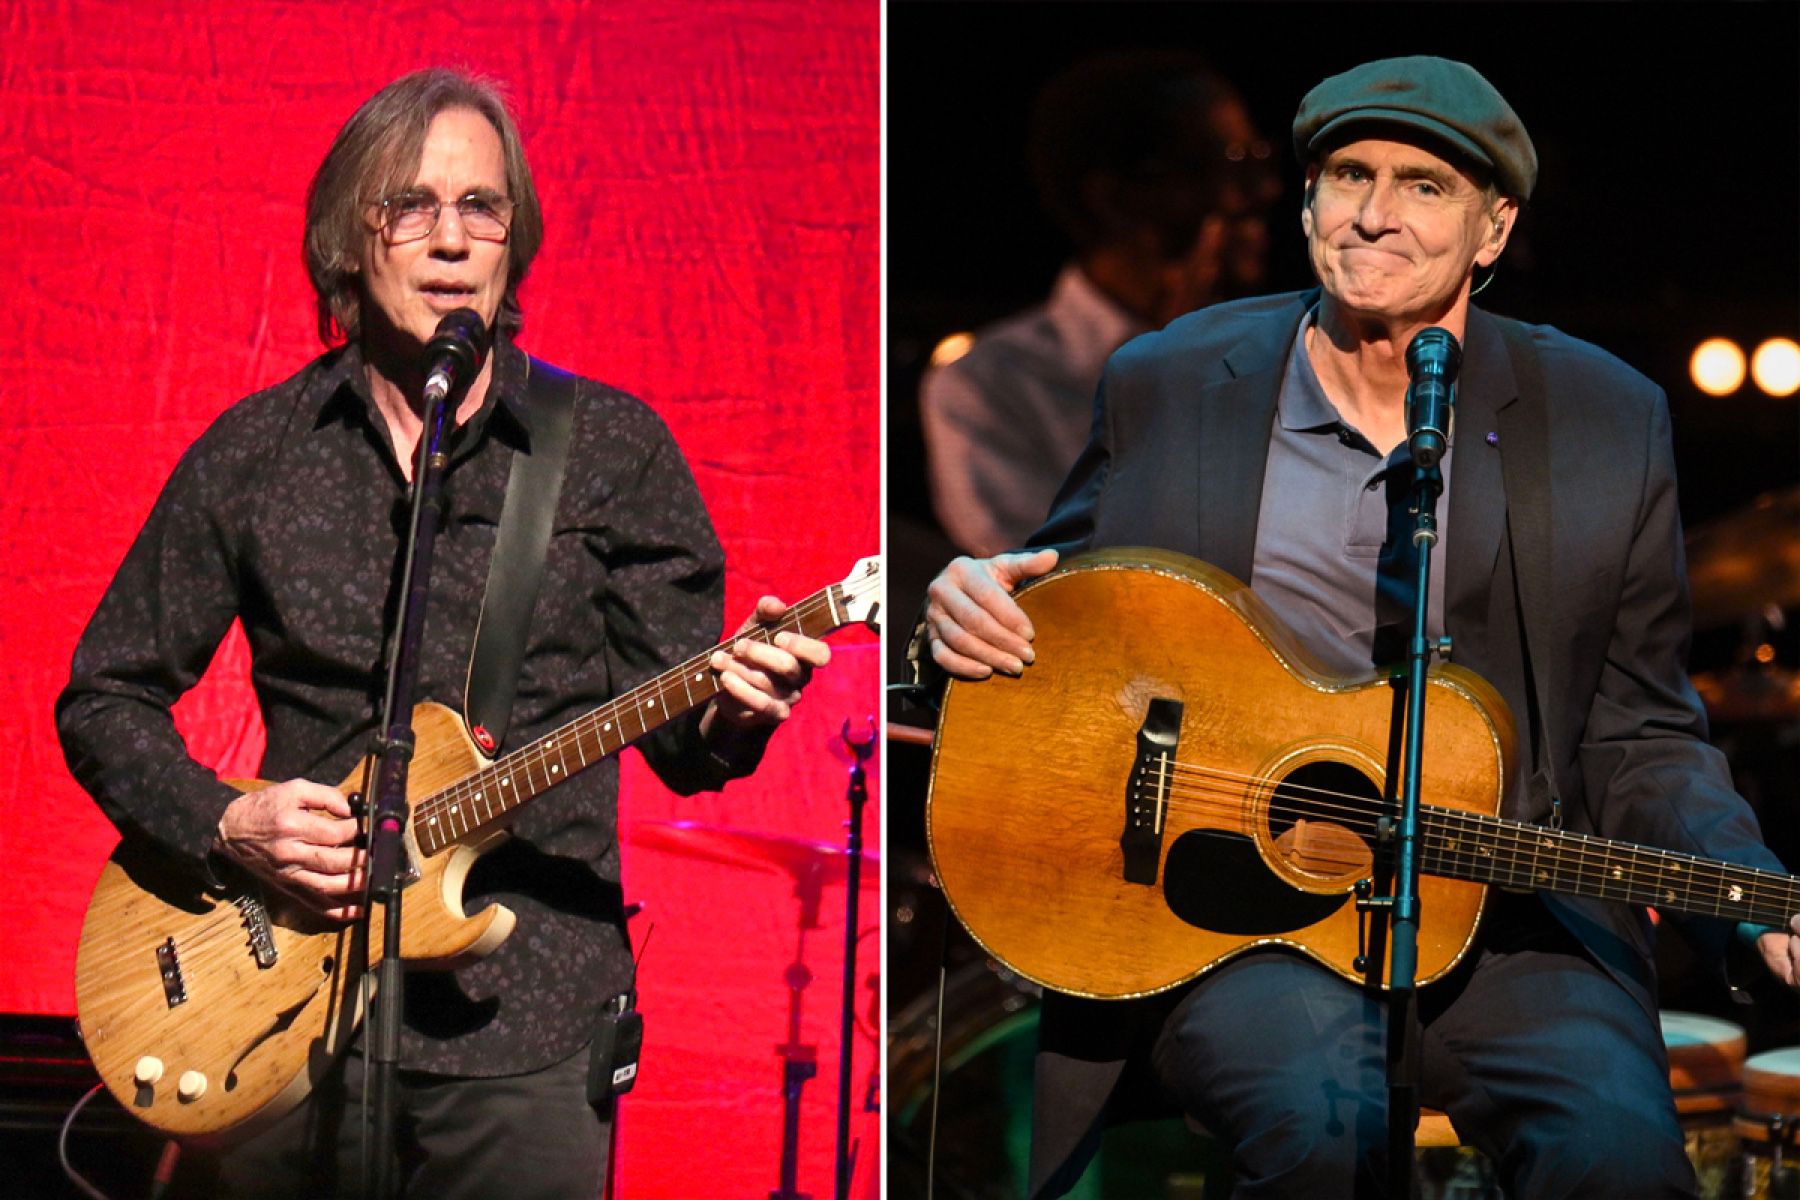 4 Tickets To James Taylor/Jackson Browne Concert